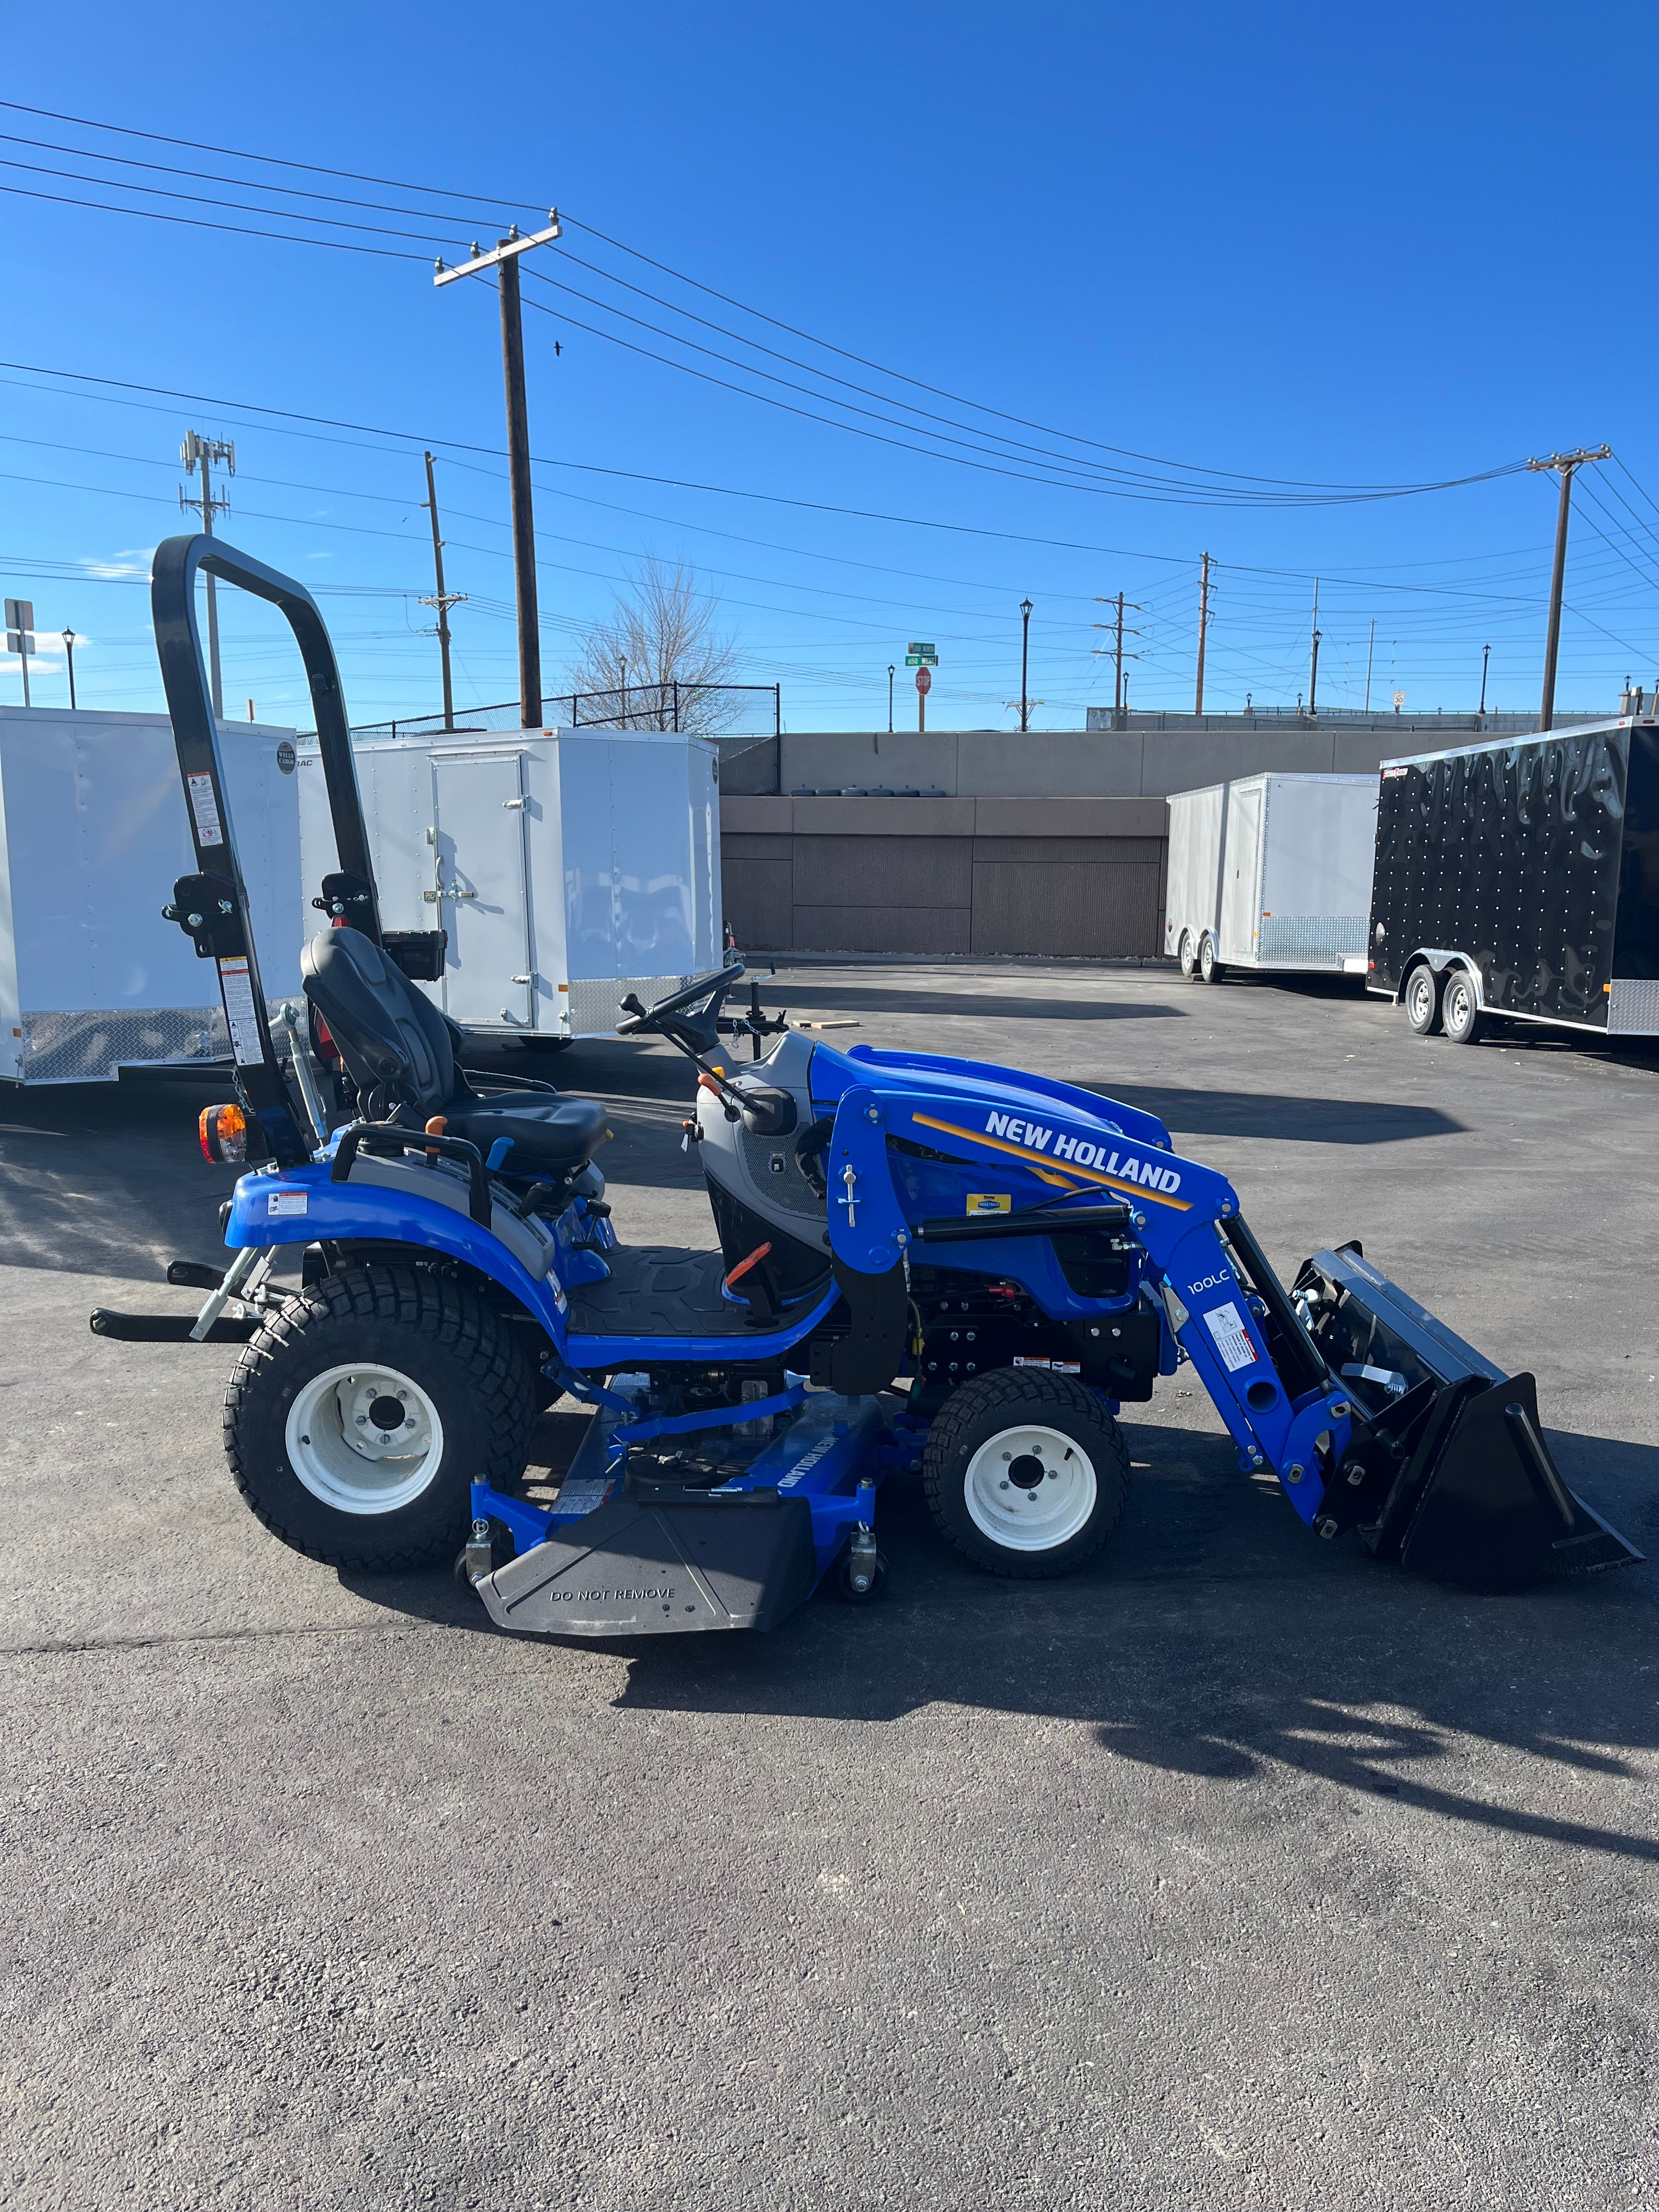 New Holland Workmaster 25s